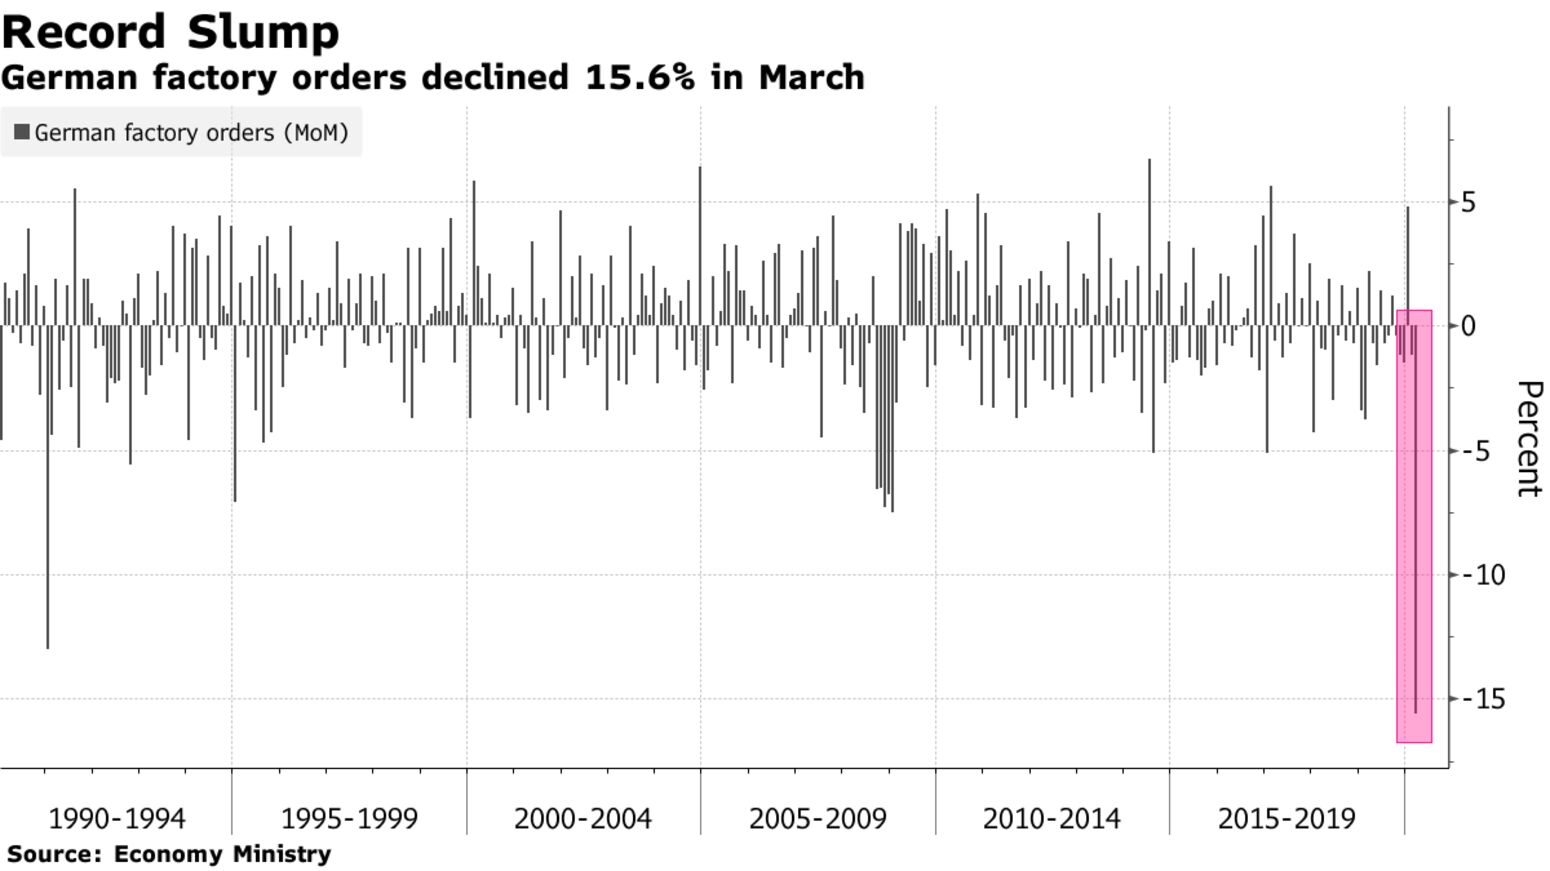 German factory orders declined 15.6% in March